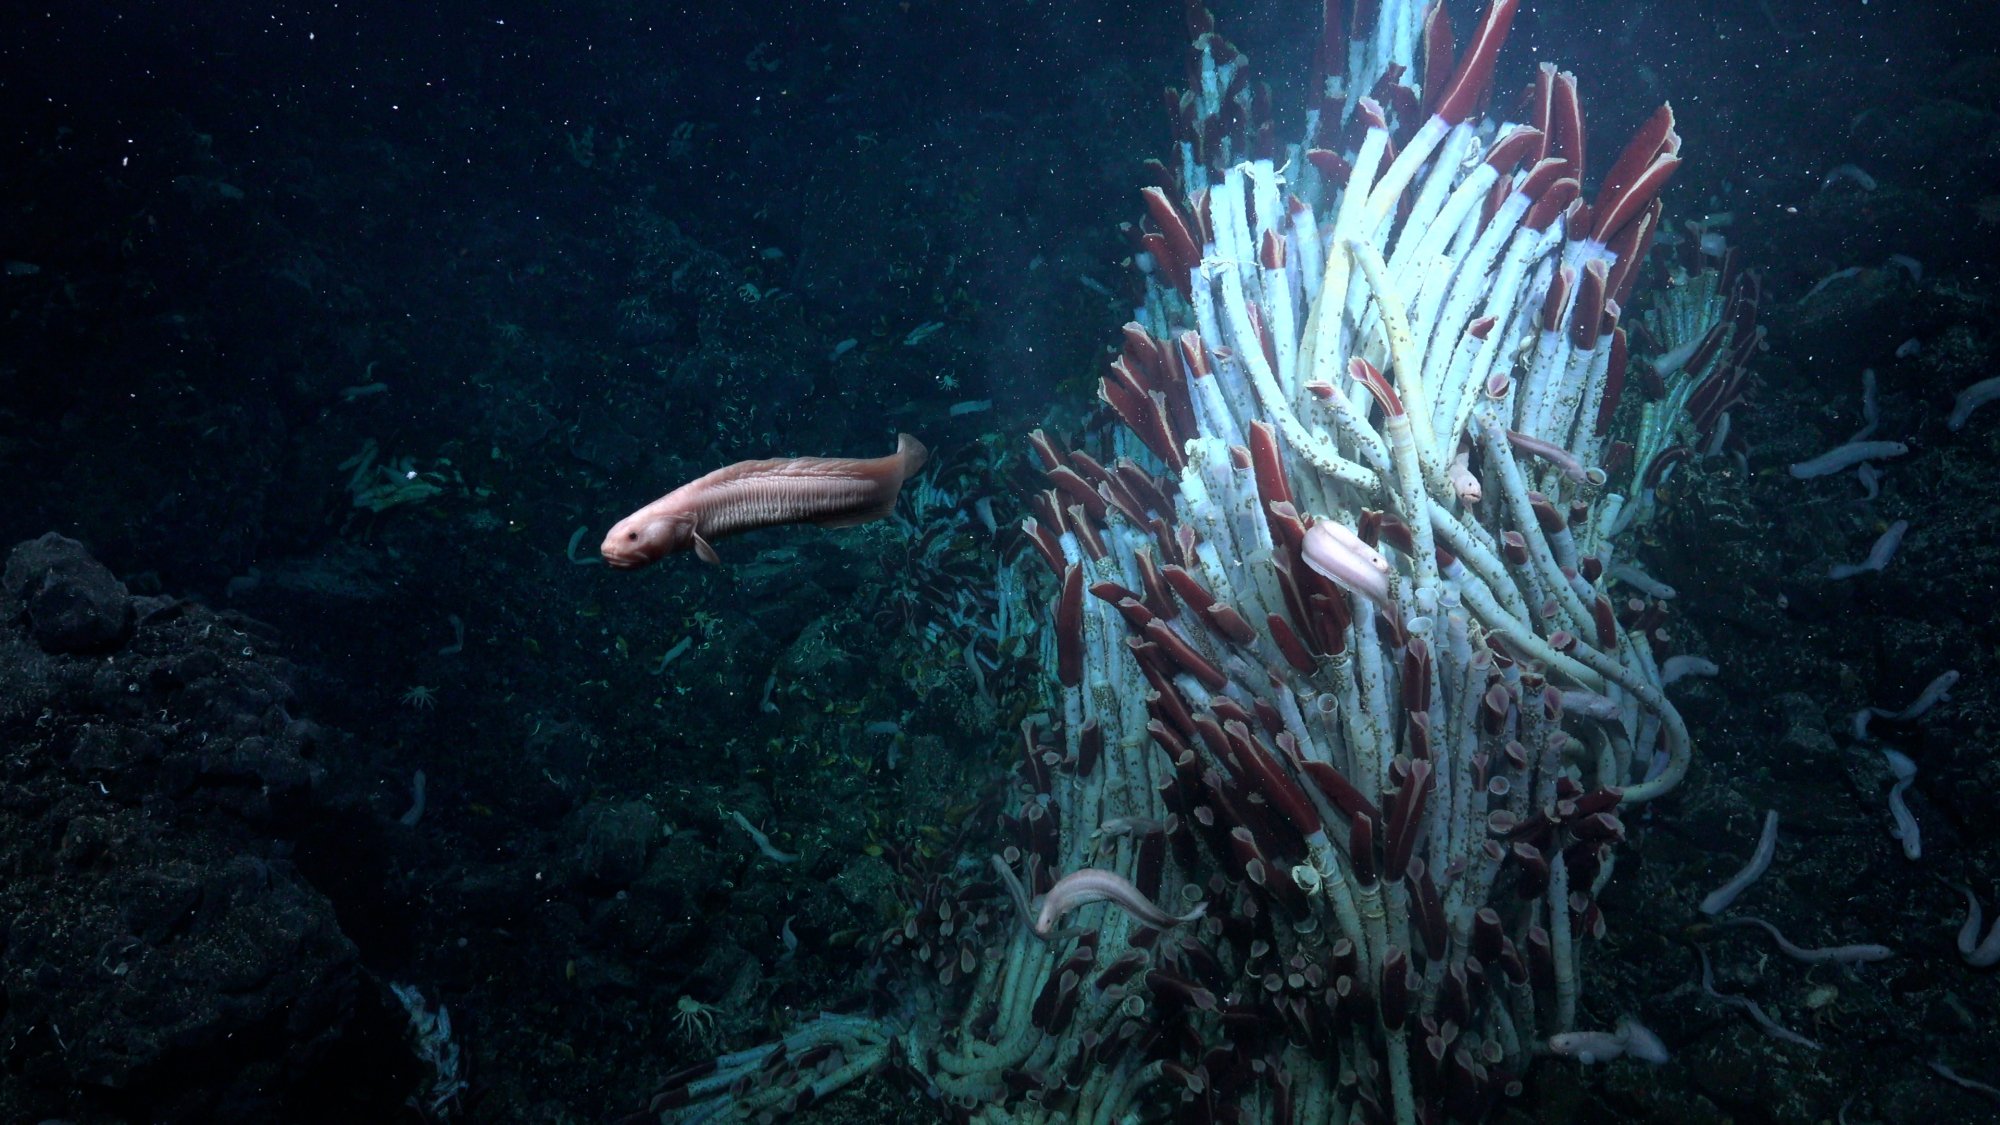 A curious-looking fish, an eelpout, swims past a colony of tubeworms at a hydrothermal vent site.